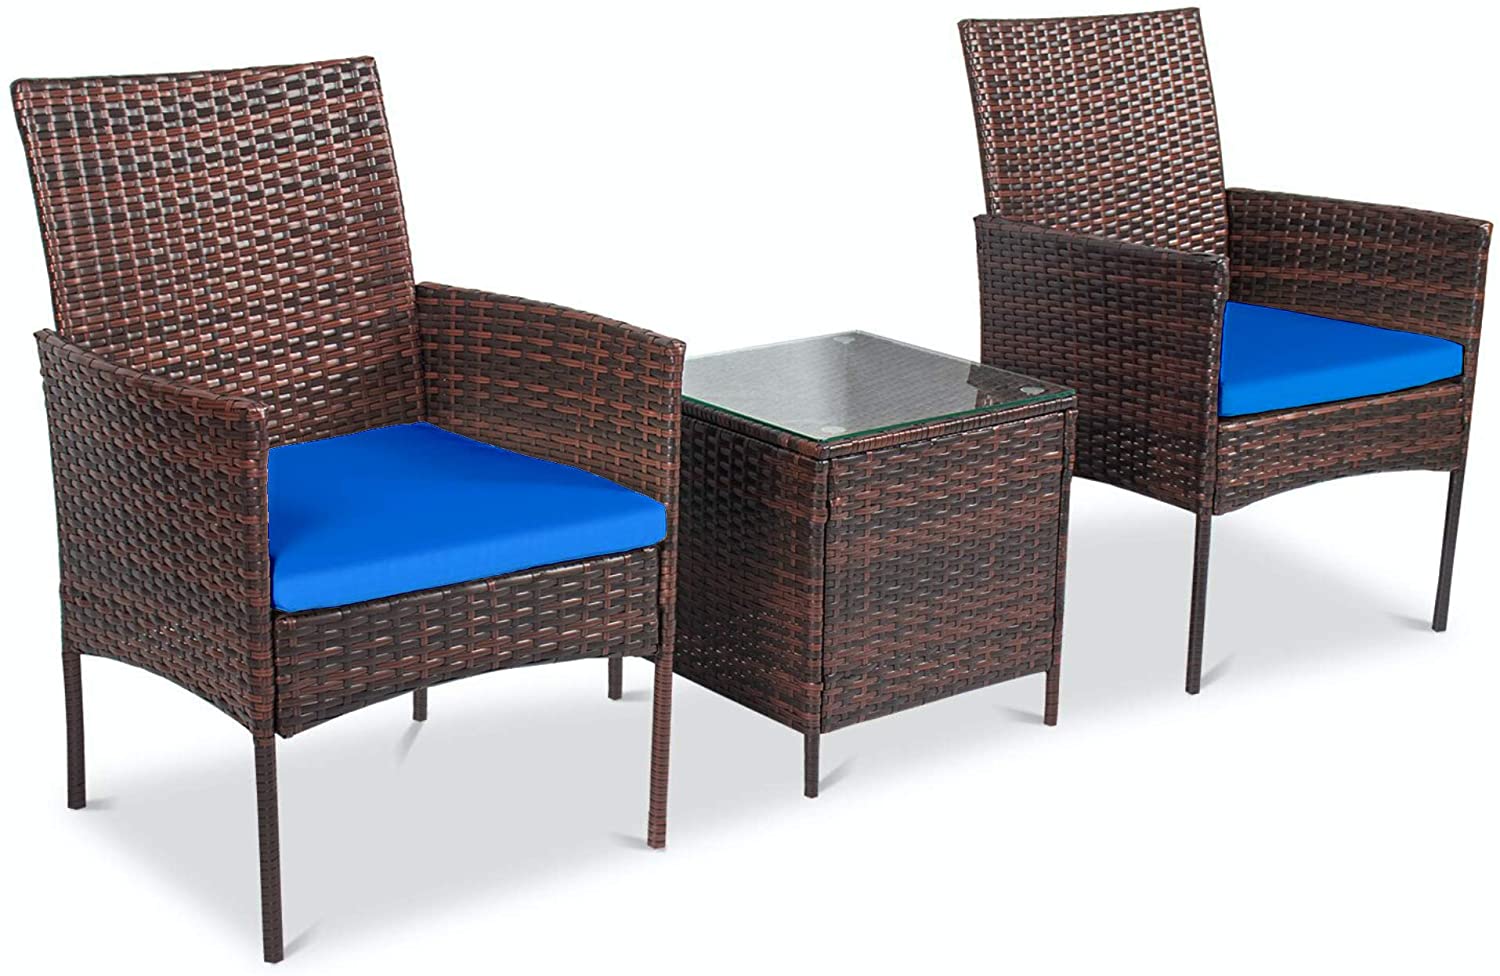 Decor Patio Wicker Bistro Set, Home Goods Outdoor Chair Cushions